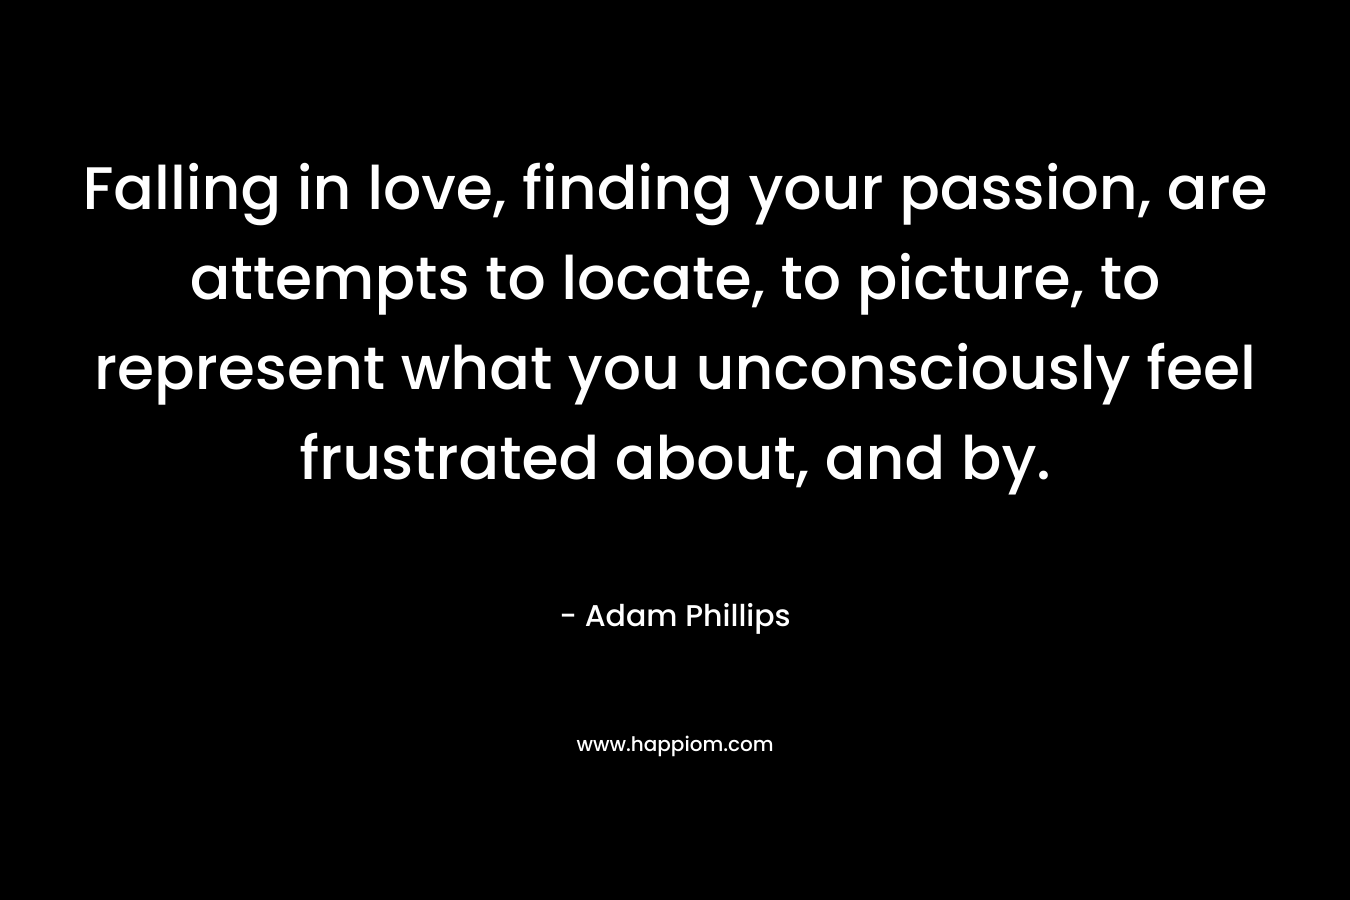 Falling in love, finding your passion, are attempts to locate, to picture, to represent what you unconsciously feel frustrated about, and by. – Adam Phillips